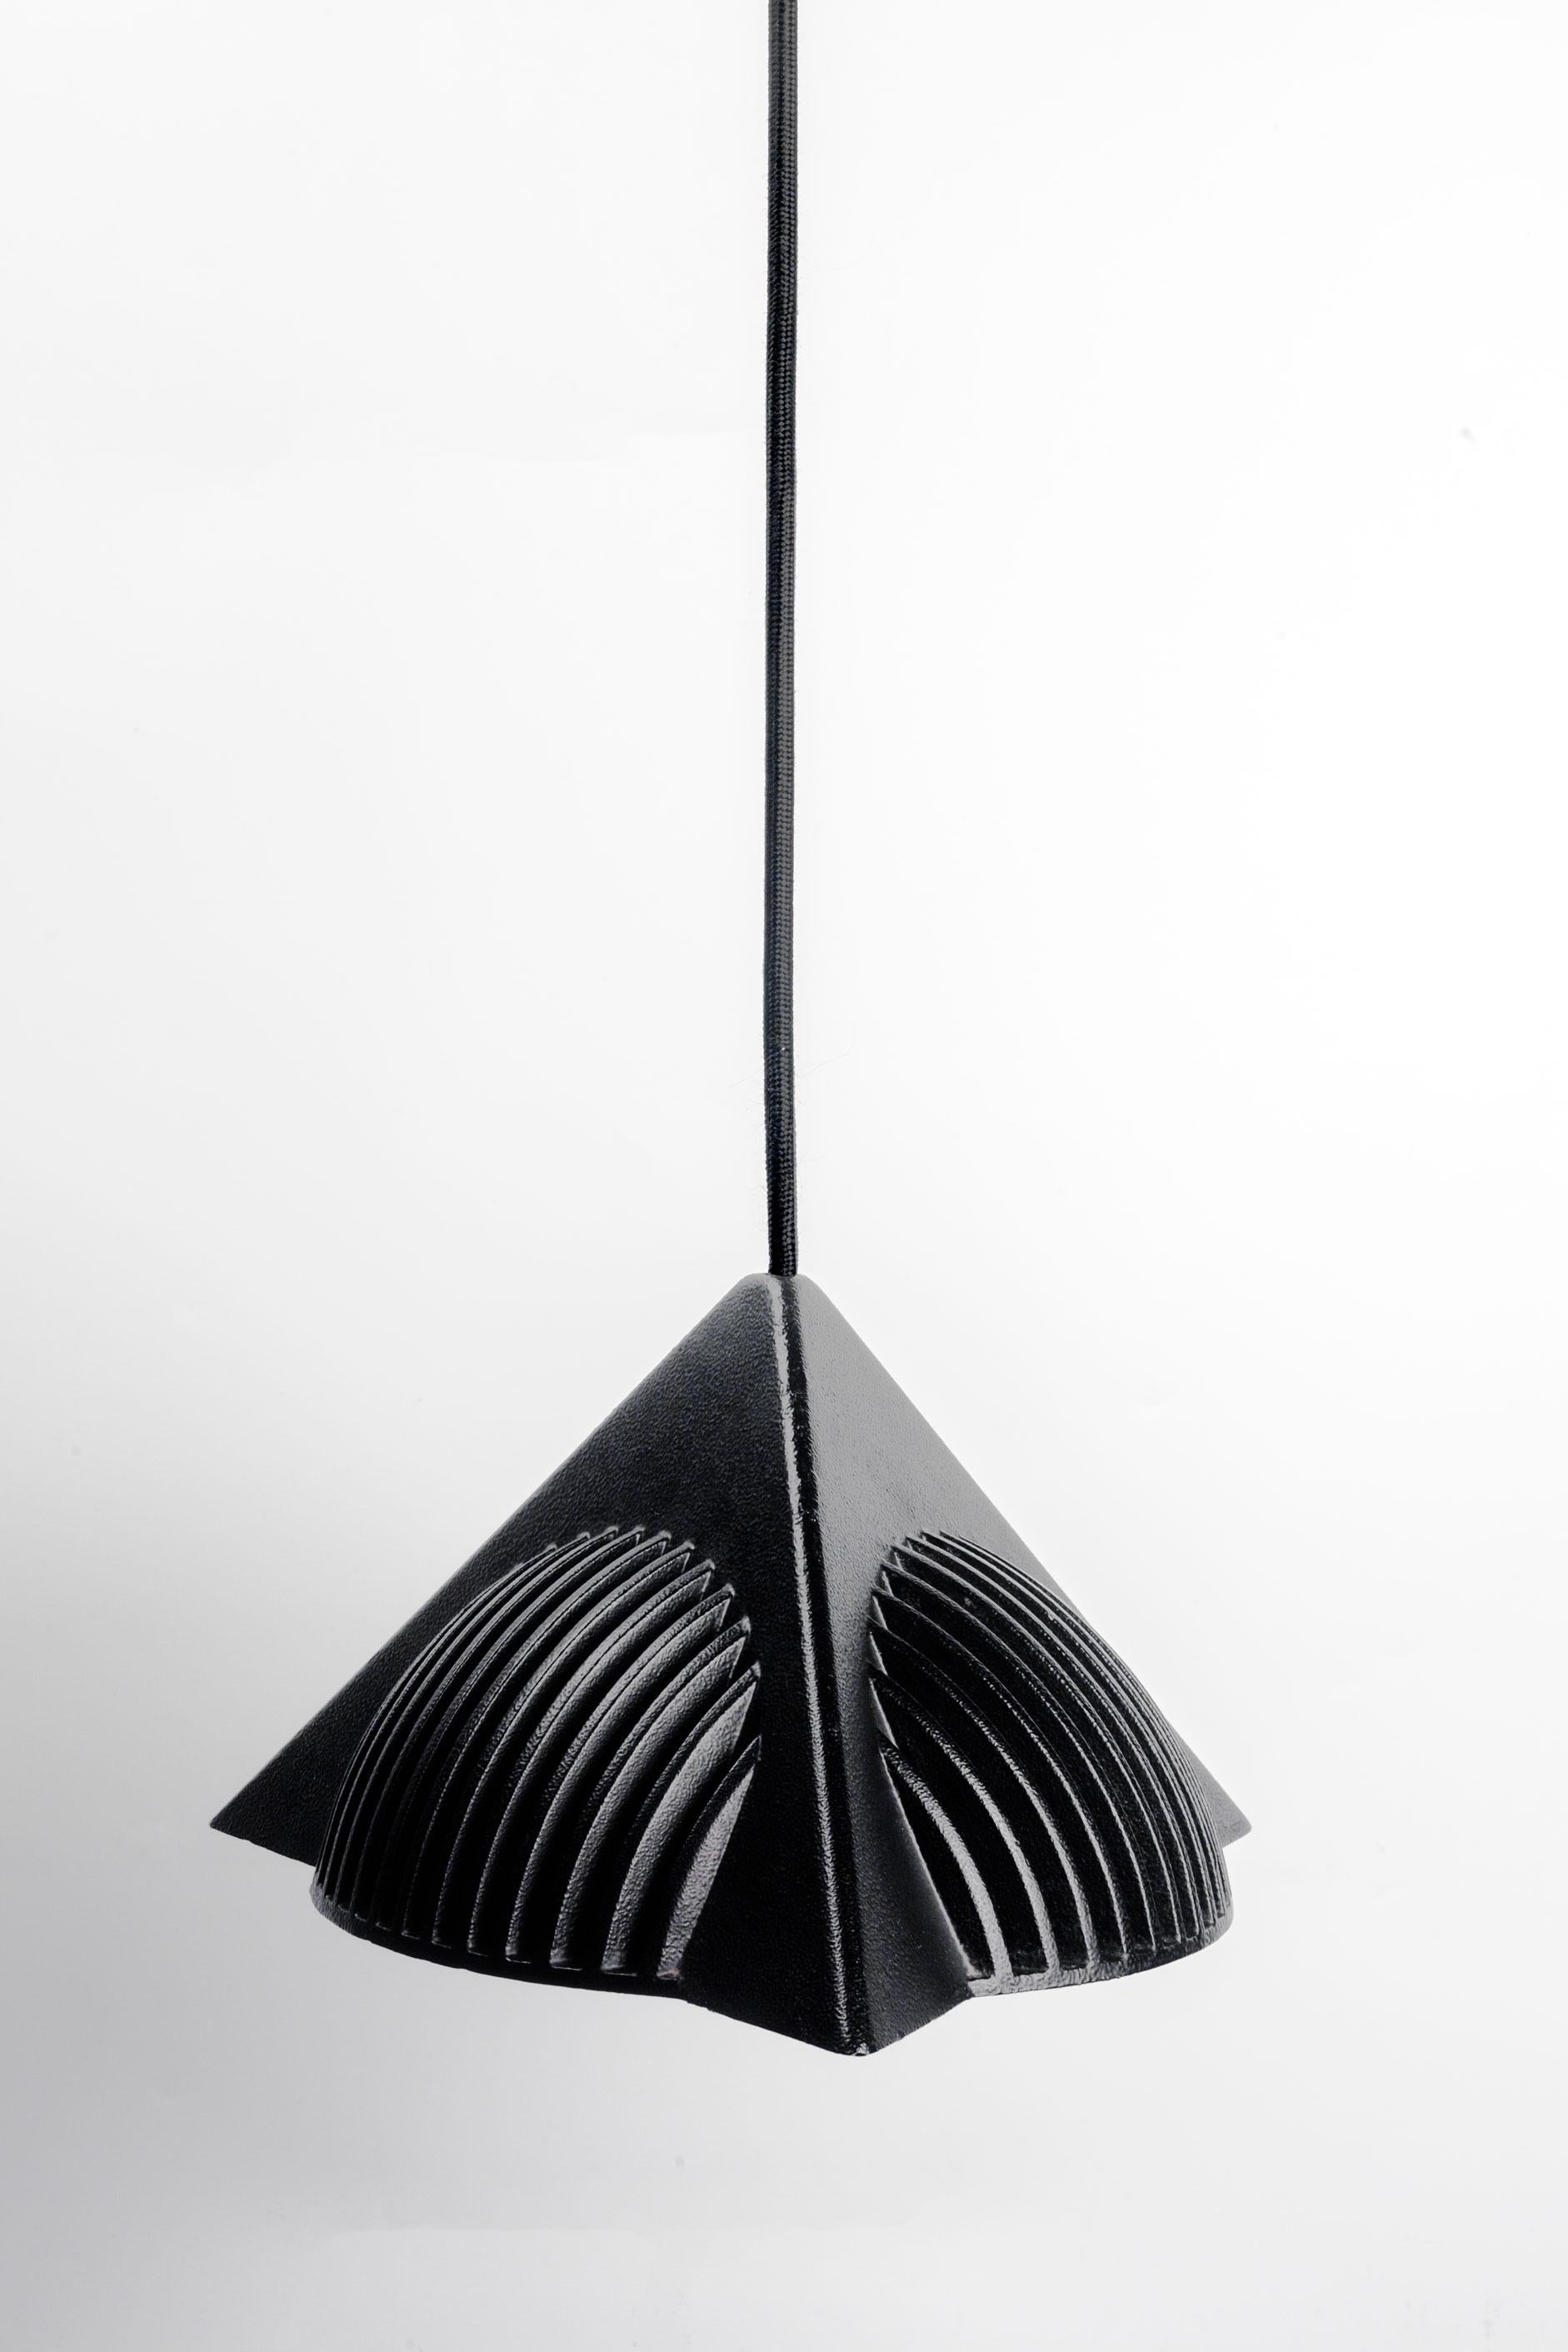 Metal and Glass Sculptural Black Pendant by Ron Rezek, USA 1990s For Sale 8